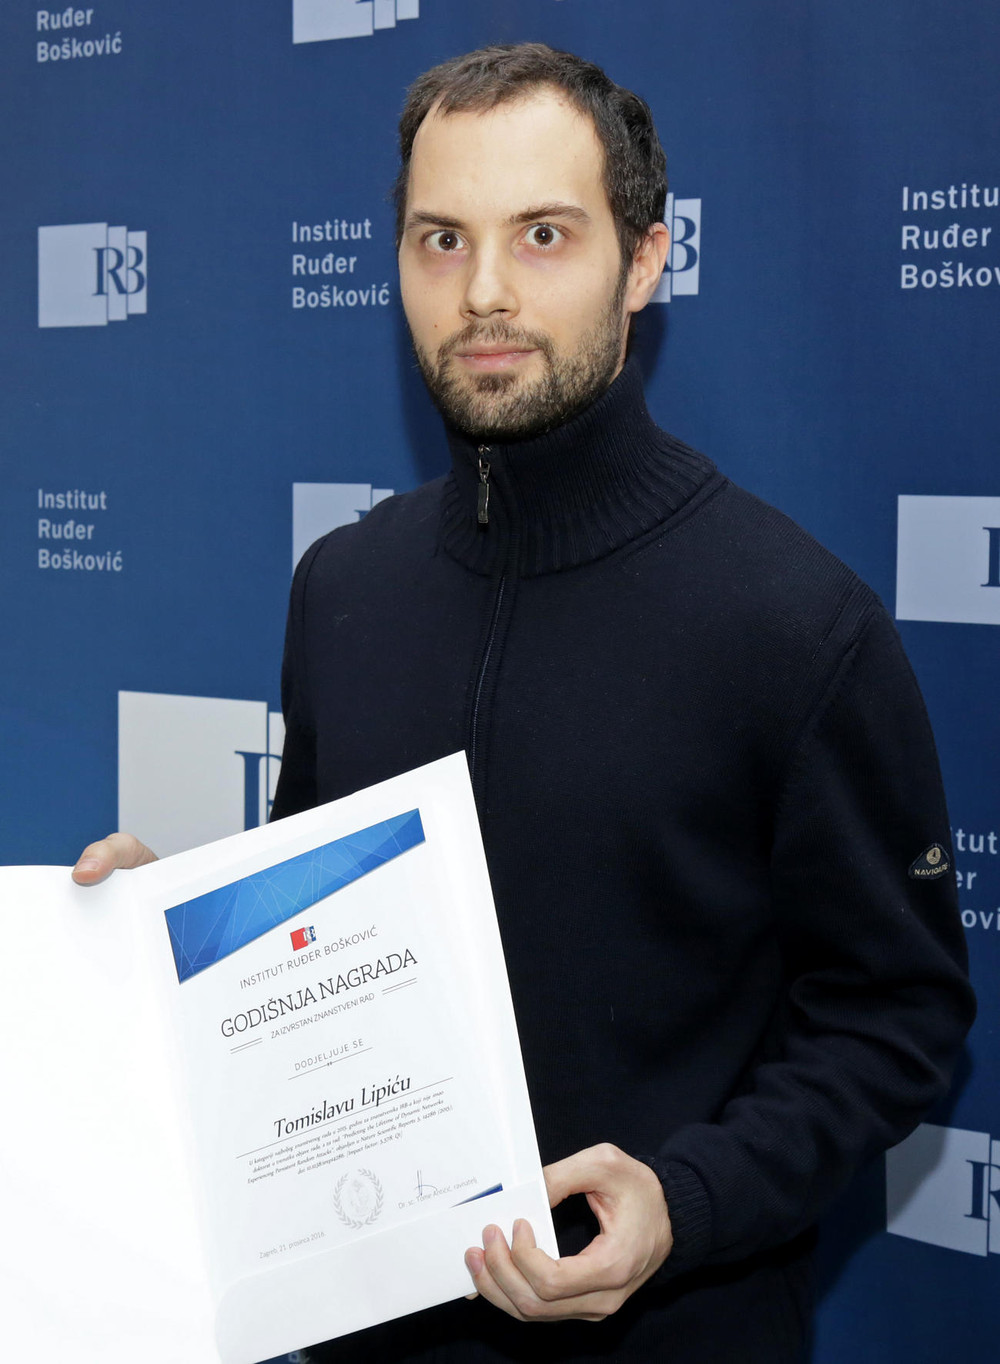 Tomislav Lipić awarded for scientific excellence